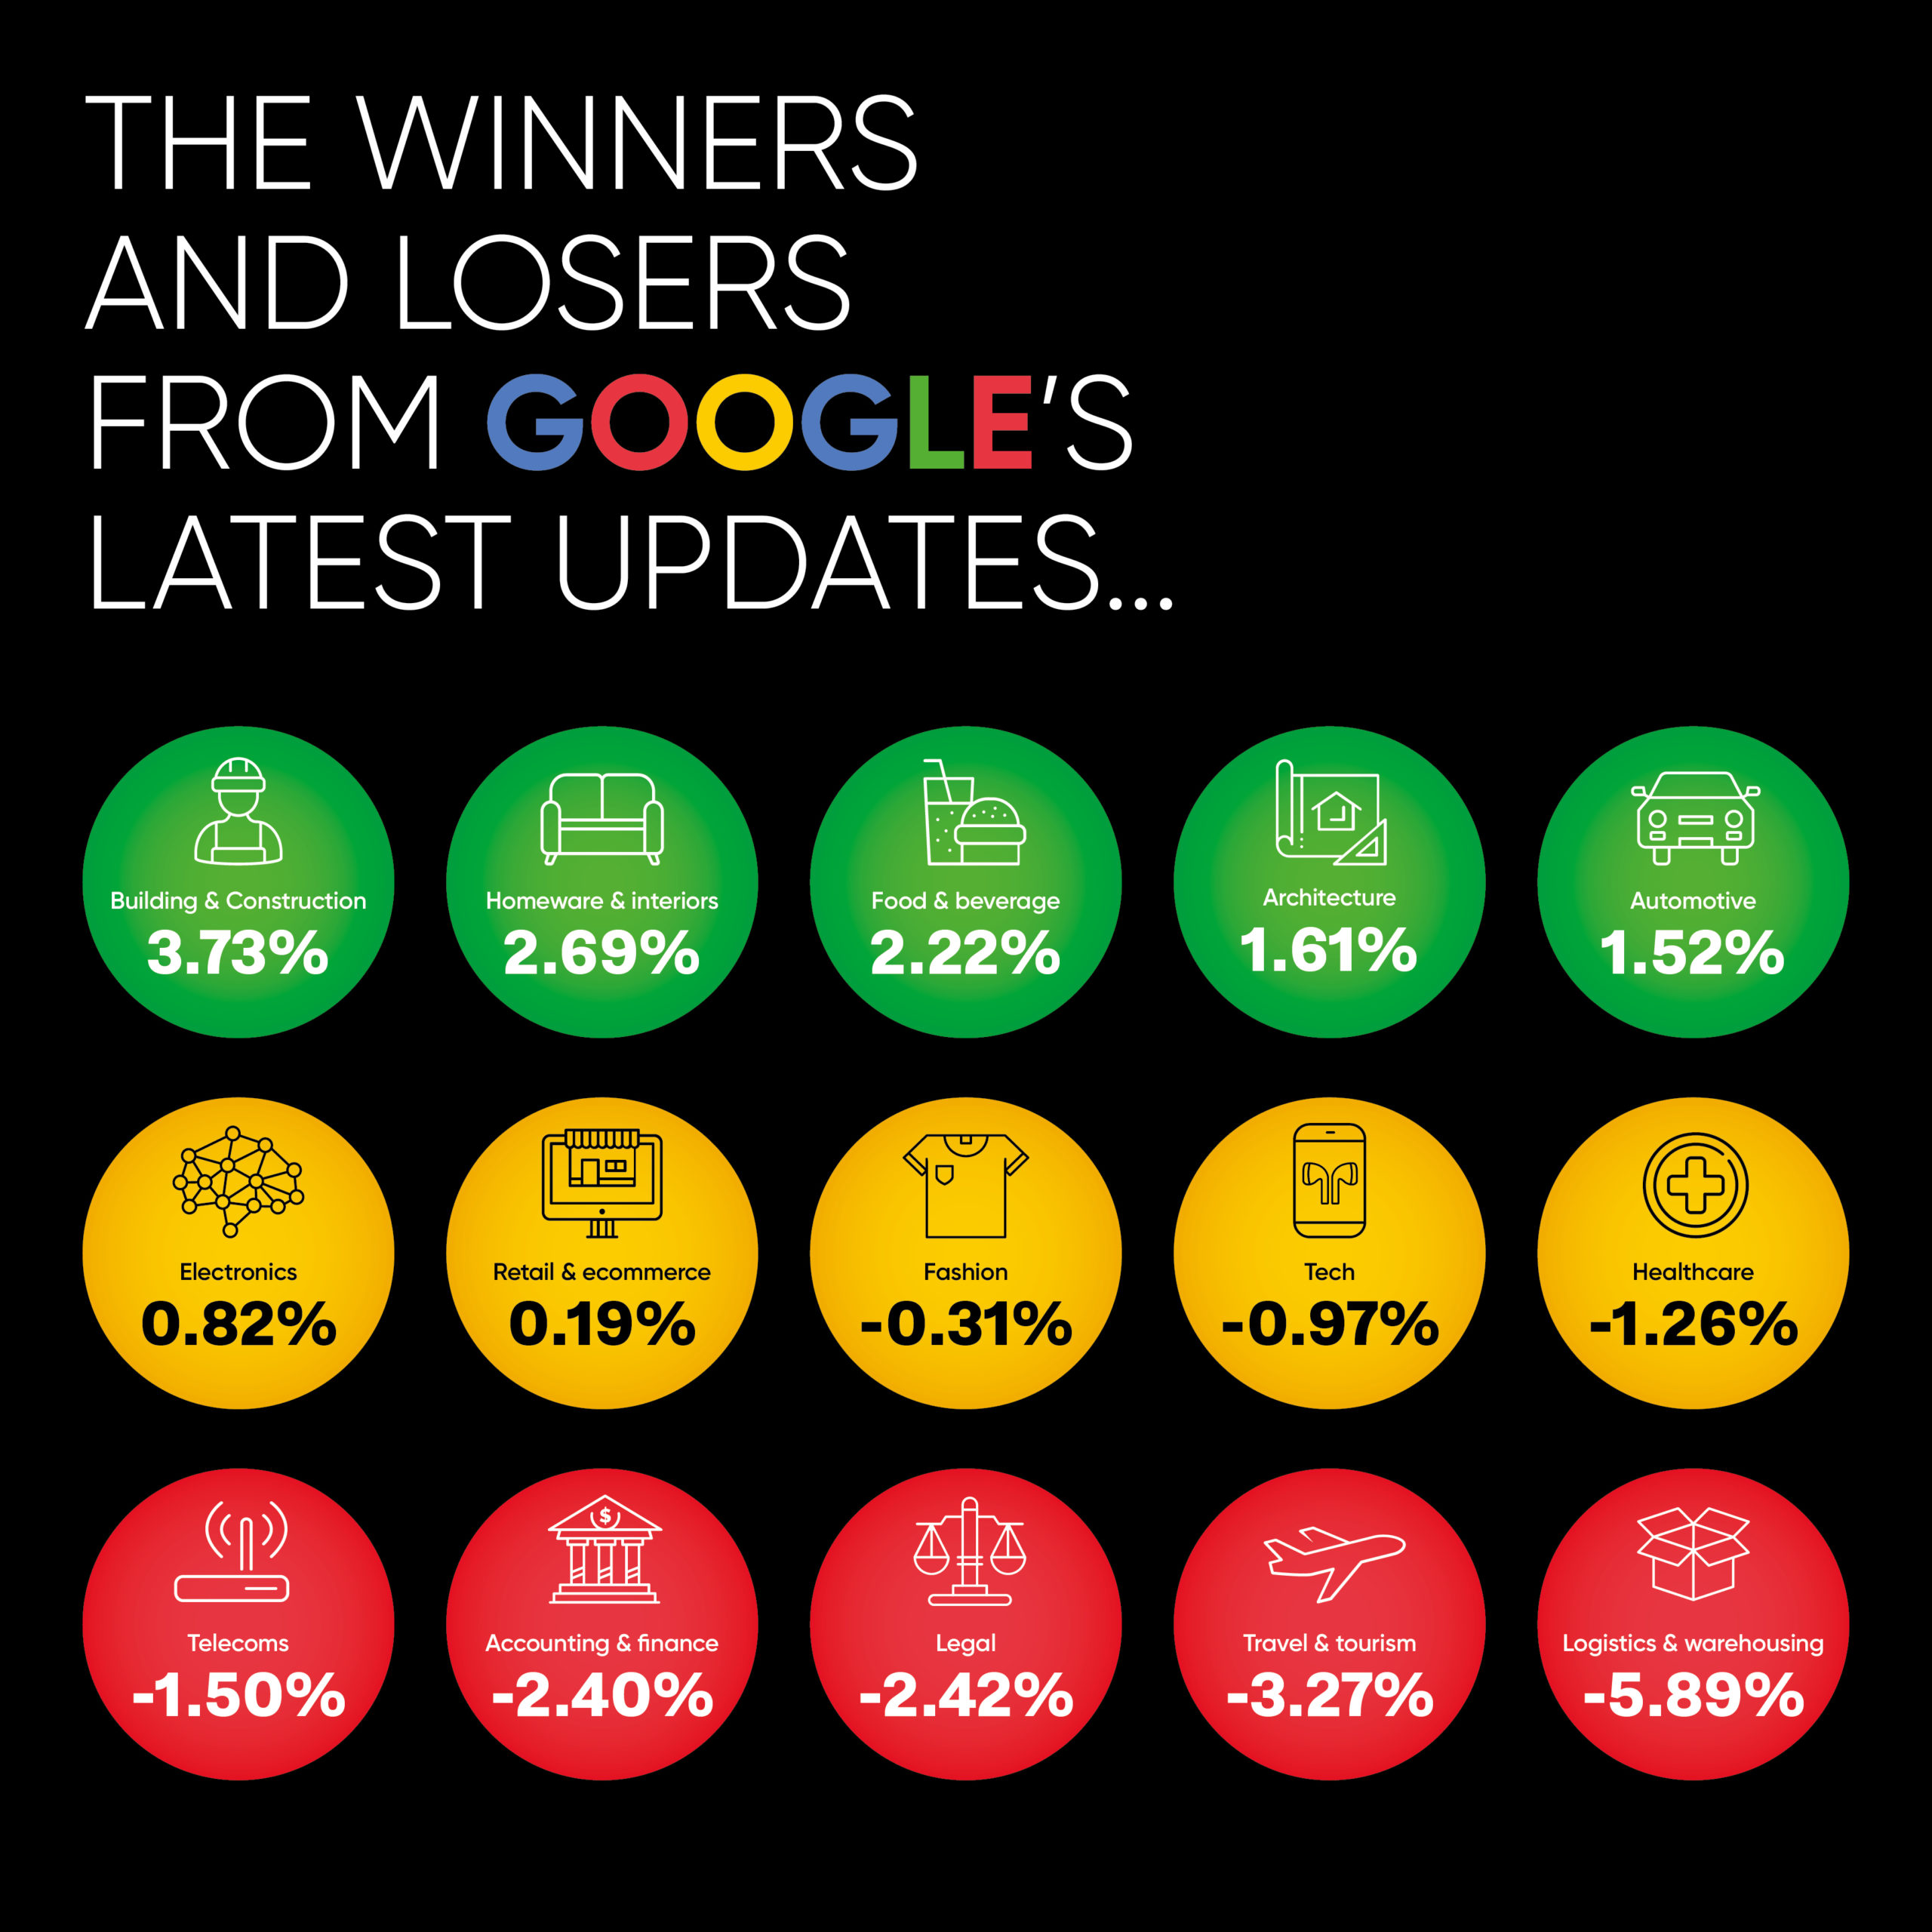 The winners and losers from Google’s latest updates